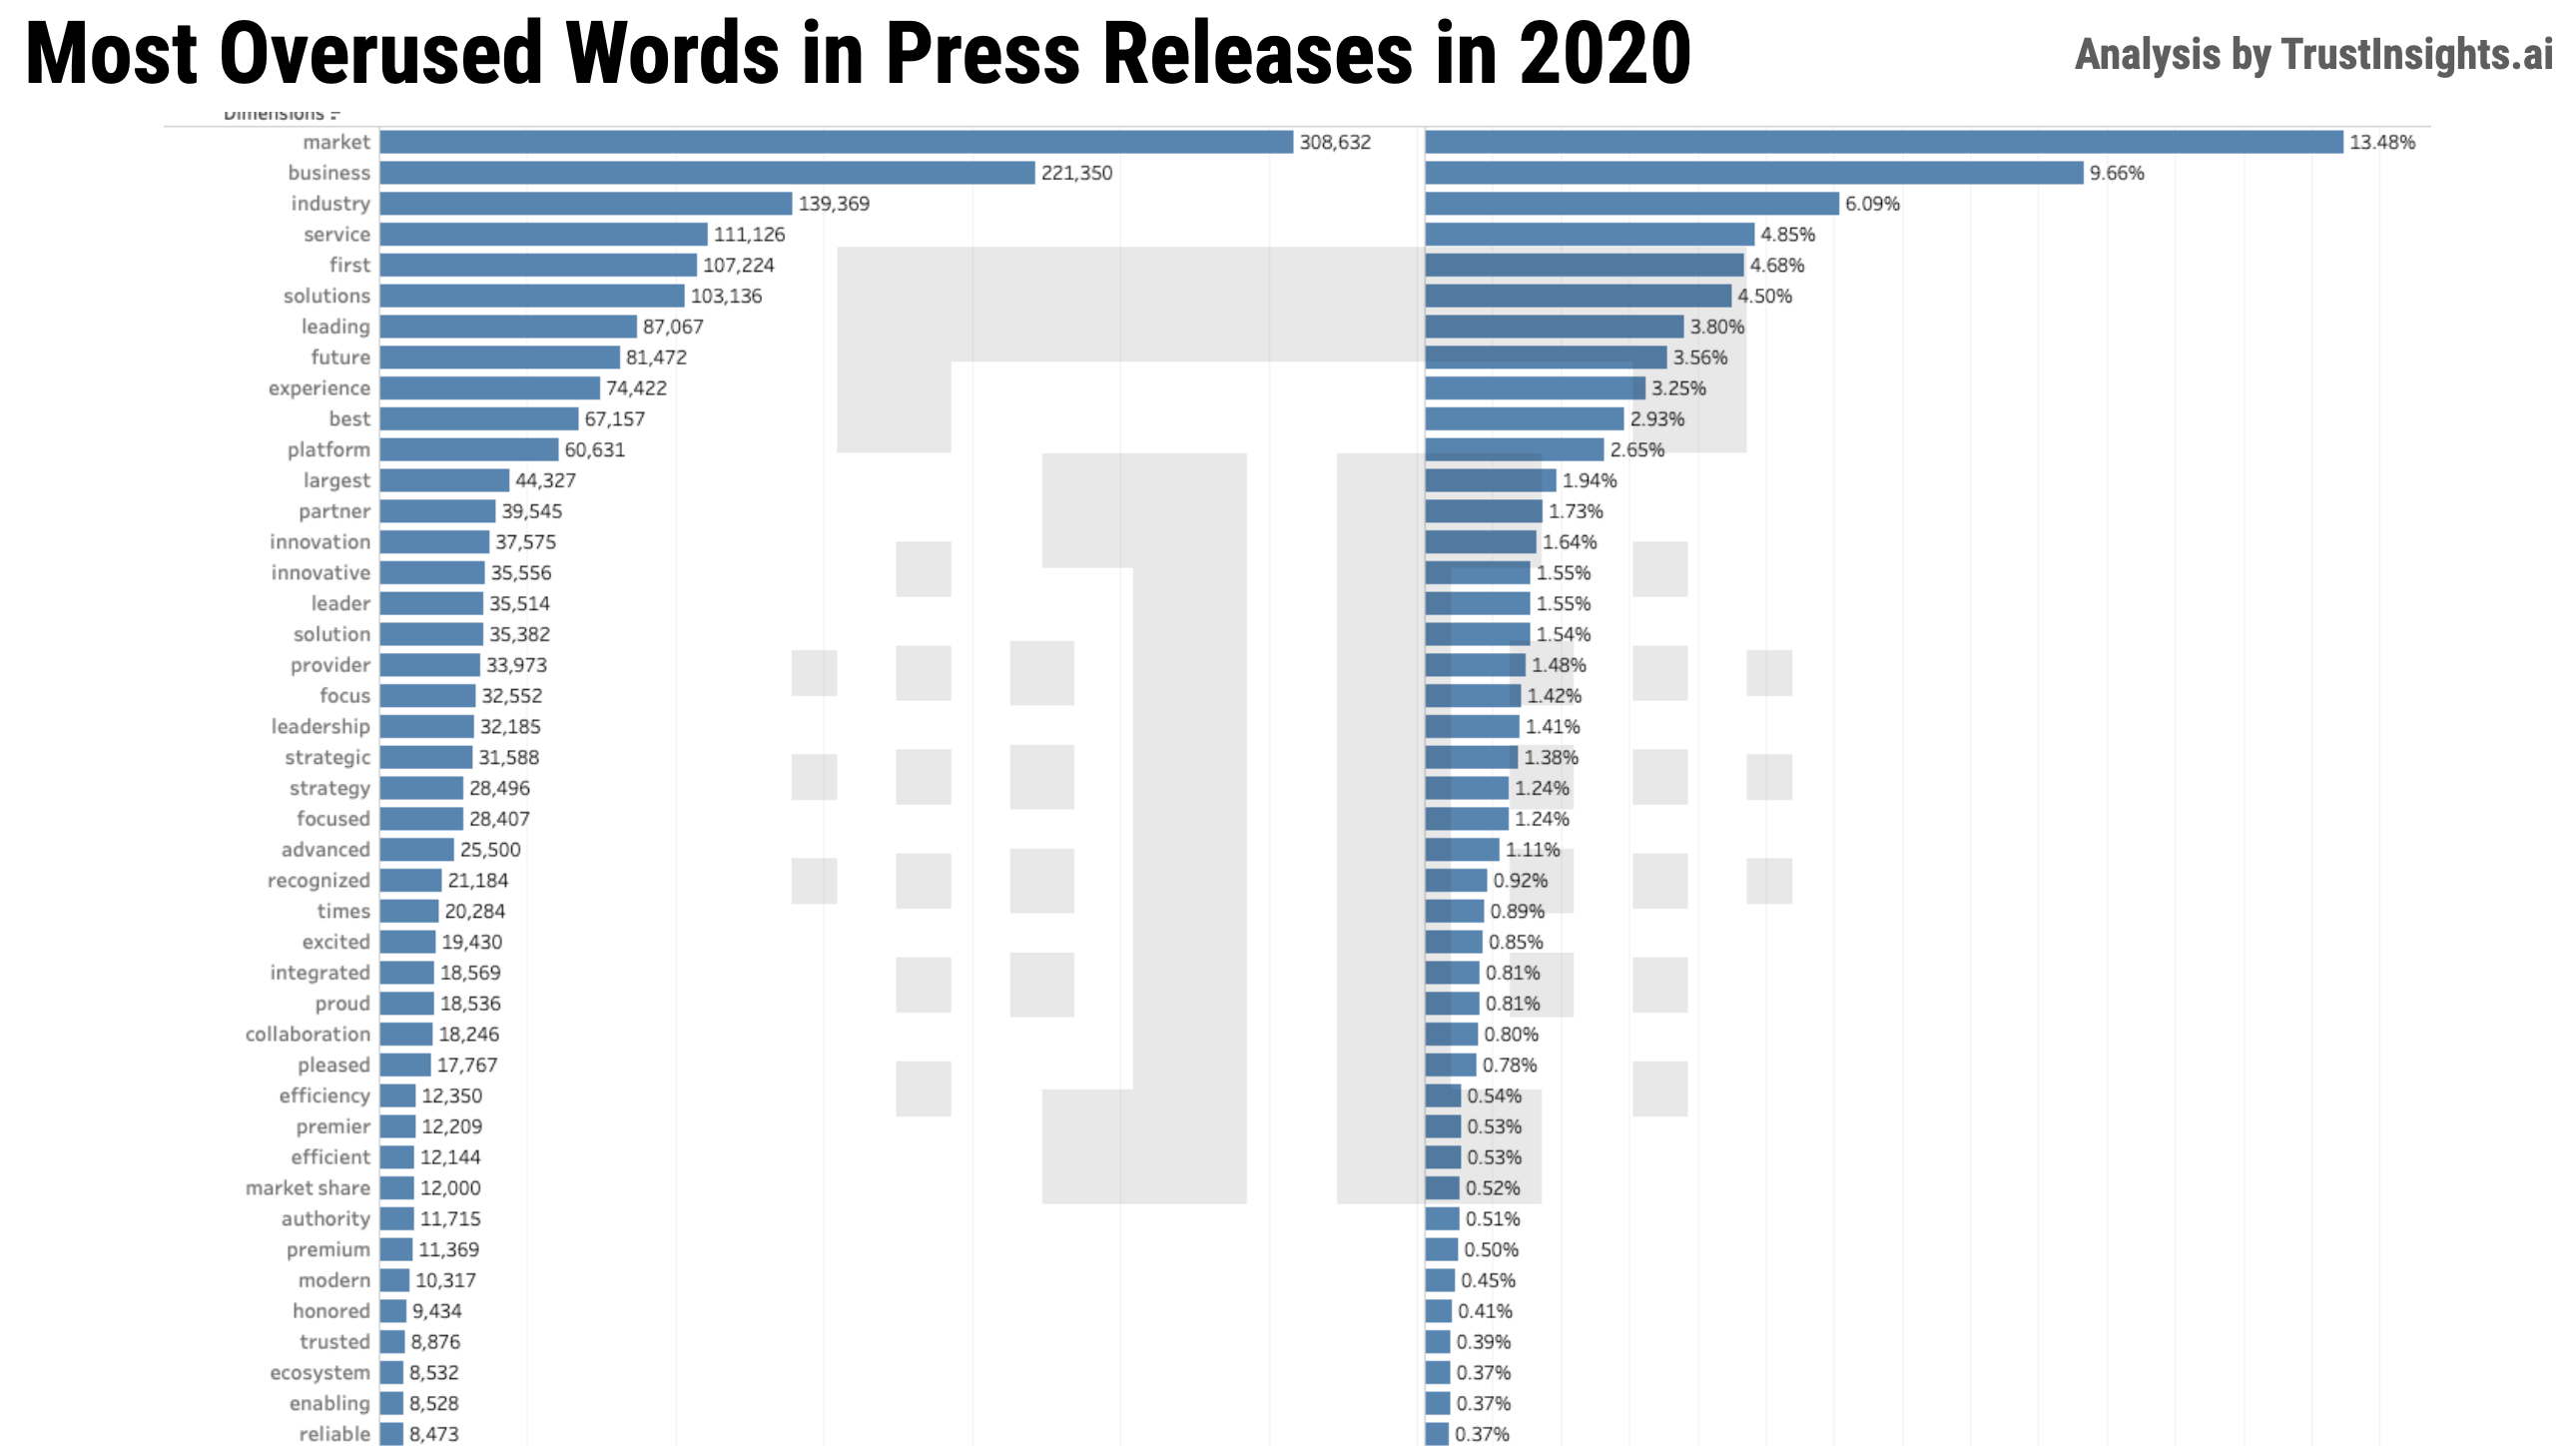 Most Overused Words in Press Releases Bar Chart